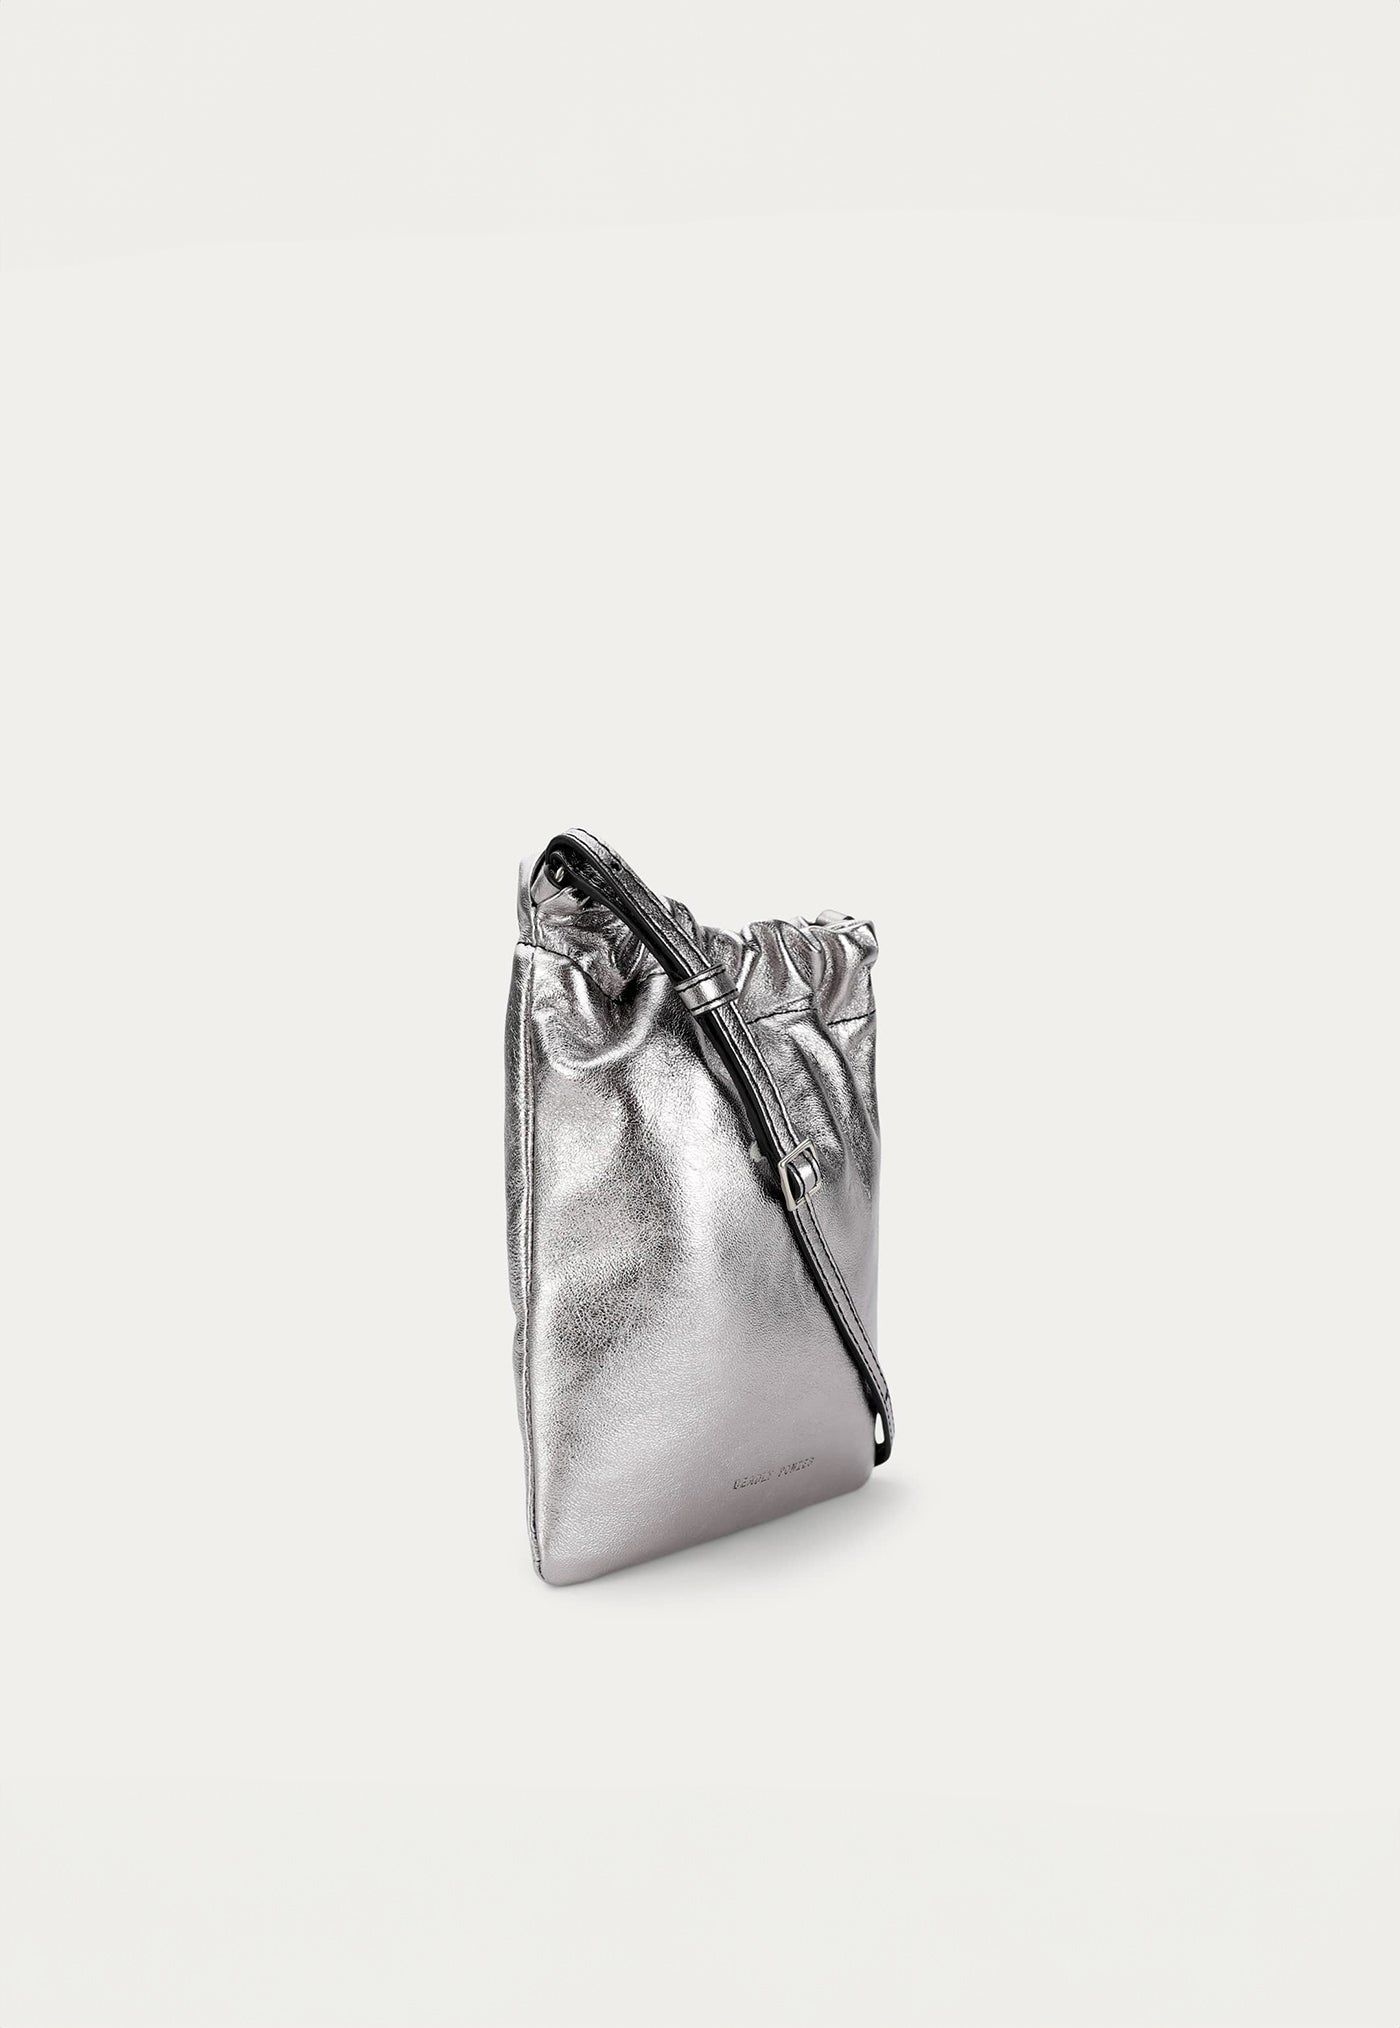 Mr Cinch Pouch - Tinfoil Metallic sold by Angel Divine